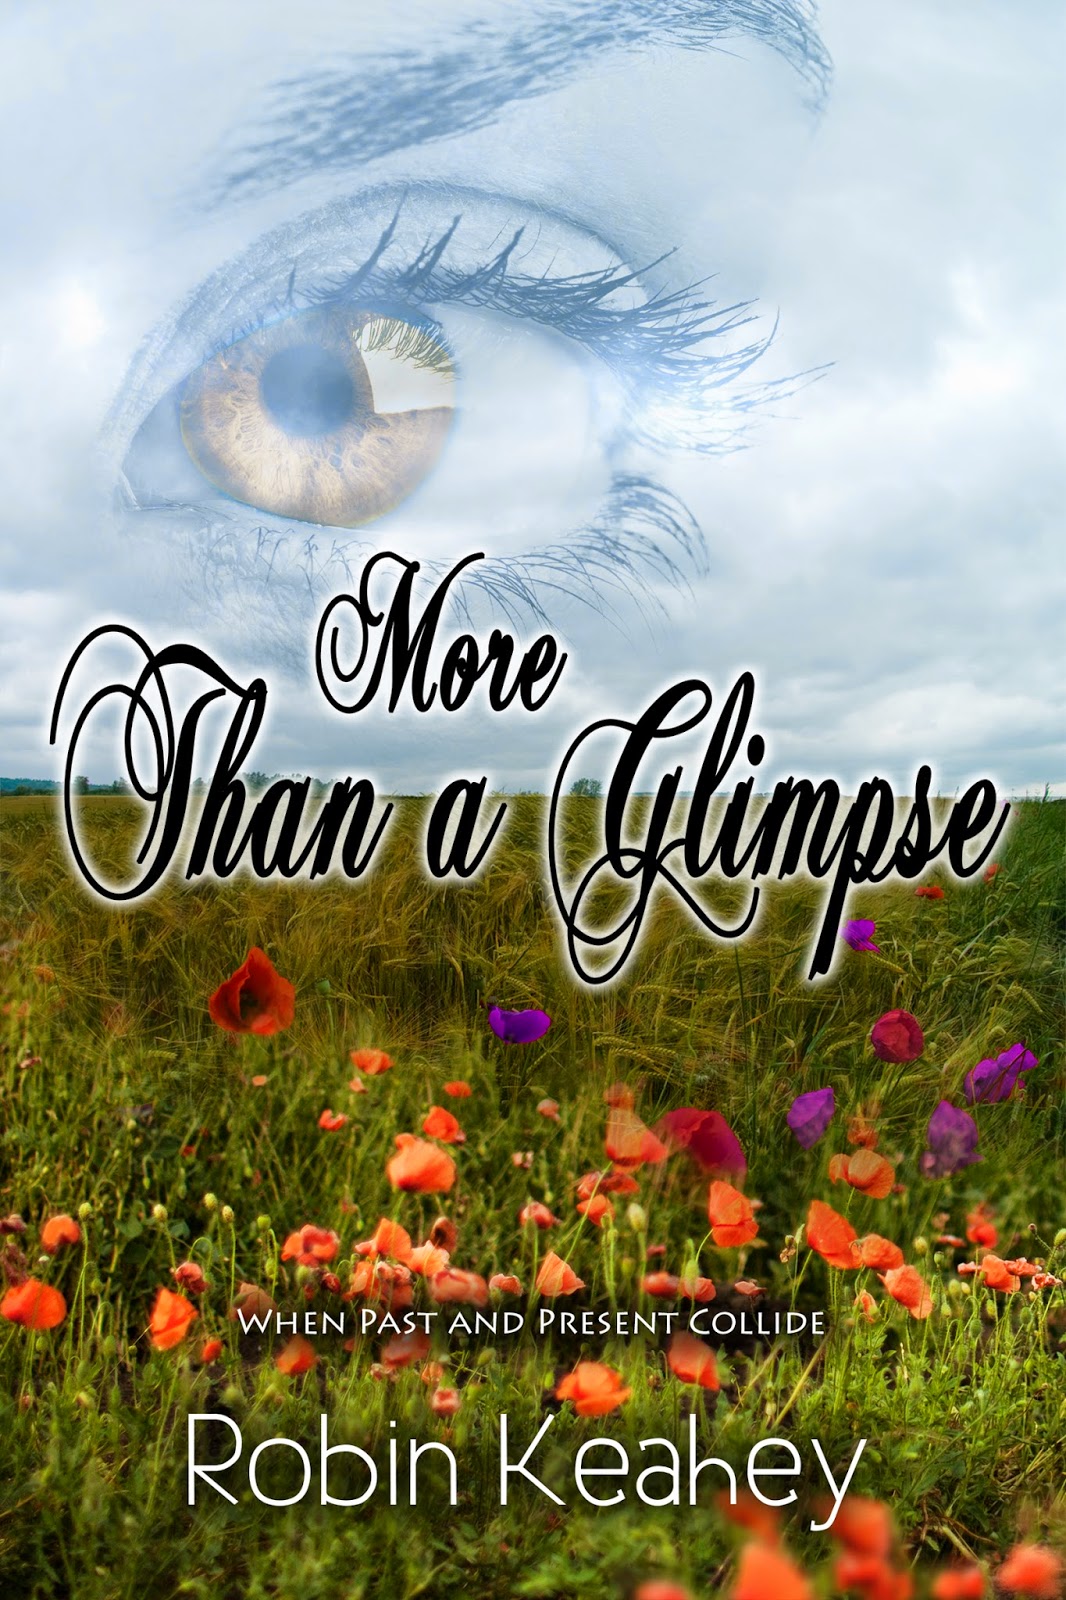 More Than a Glimpse {Robin Keahey} | #bookreview #christianfiction #glimpseseries